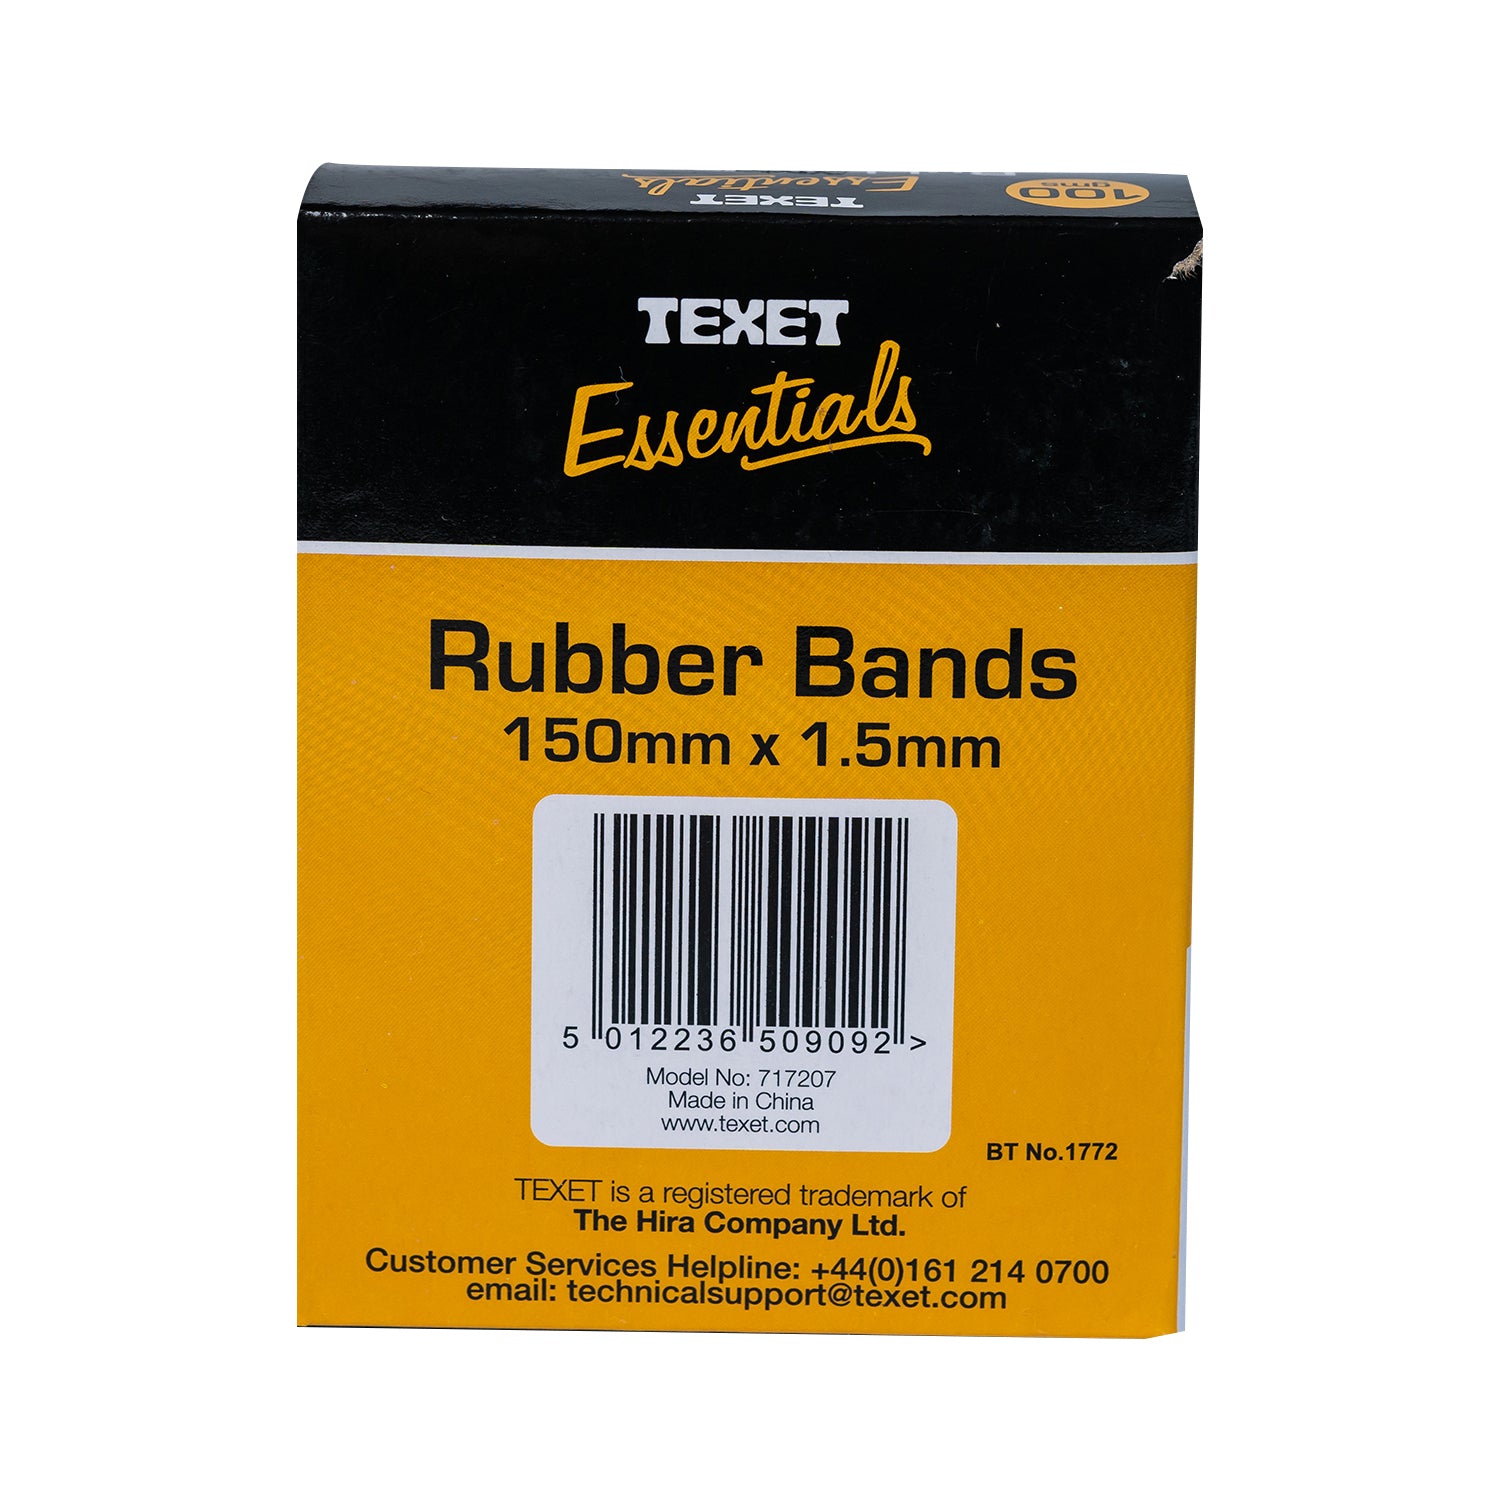 Rubber Bands 100g 150x1.5mm Natural